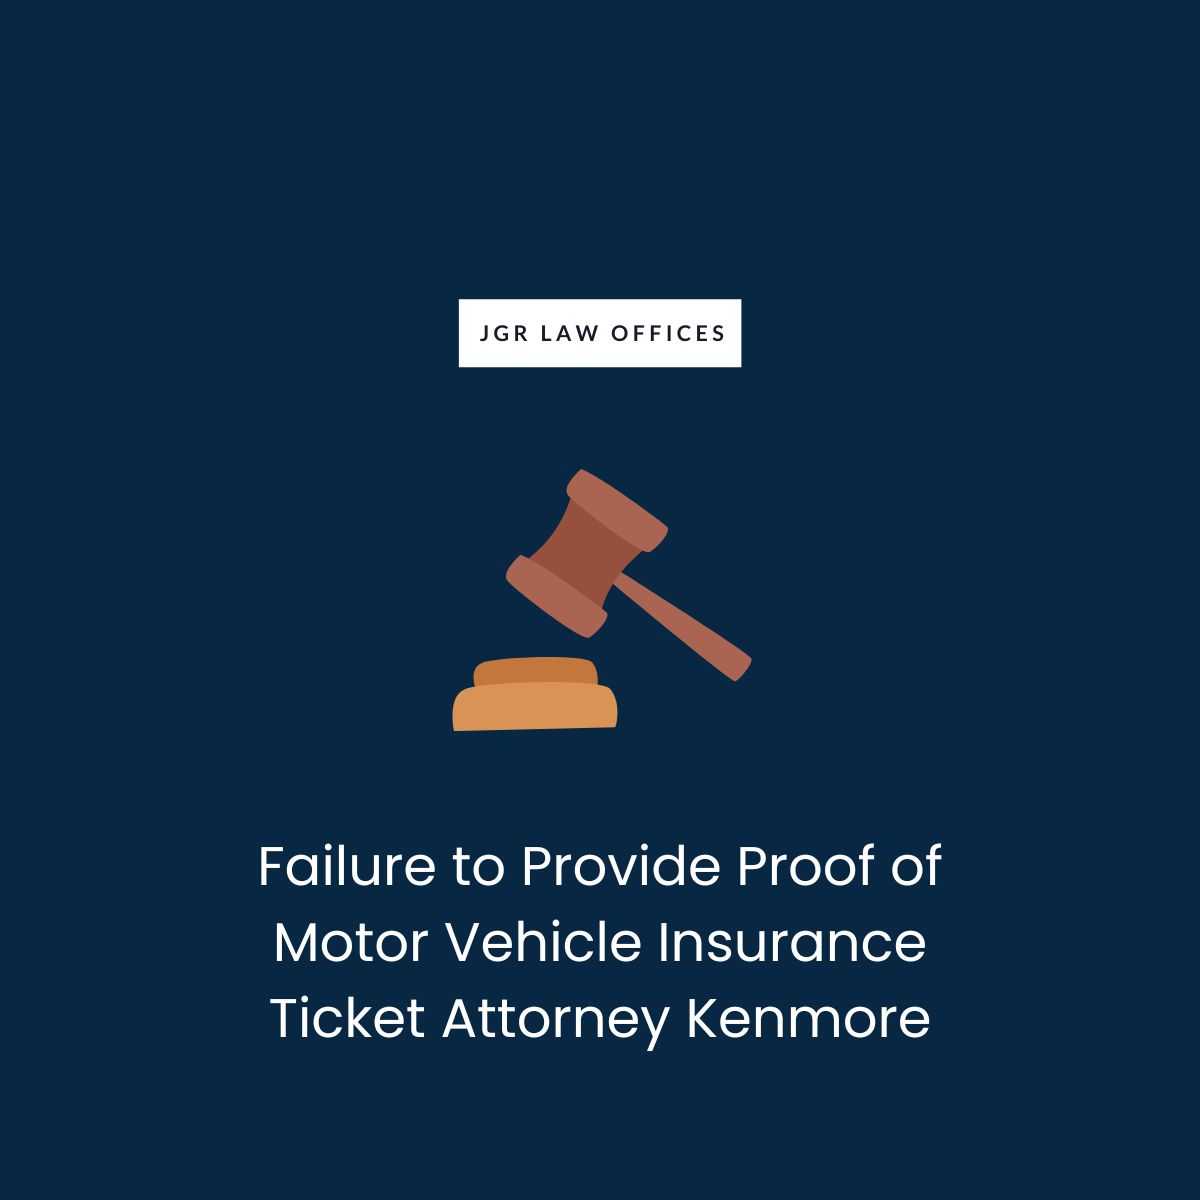 Failure to Provide Proof of Motor Vehicle Insurance Ticket Attorney Kenmore